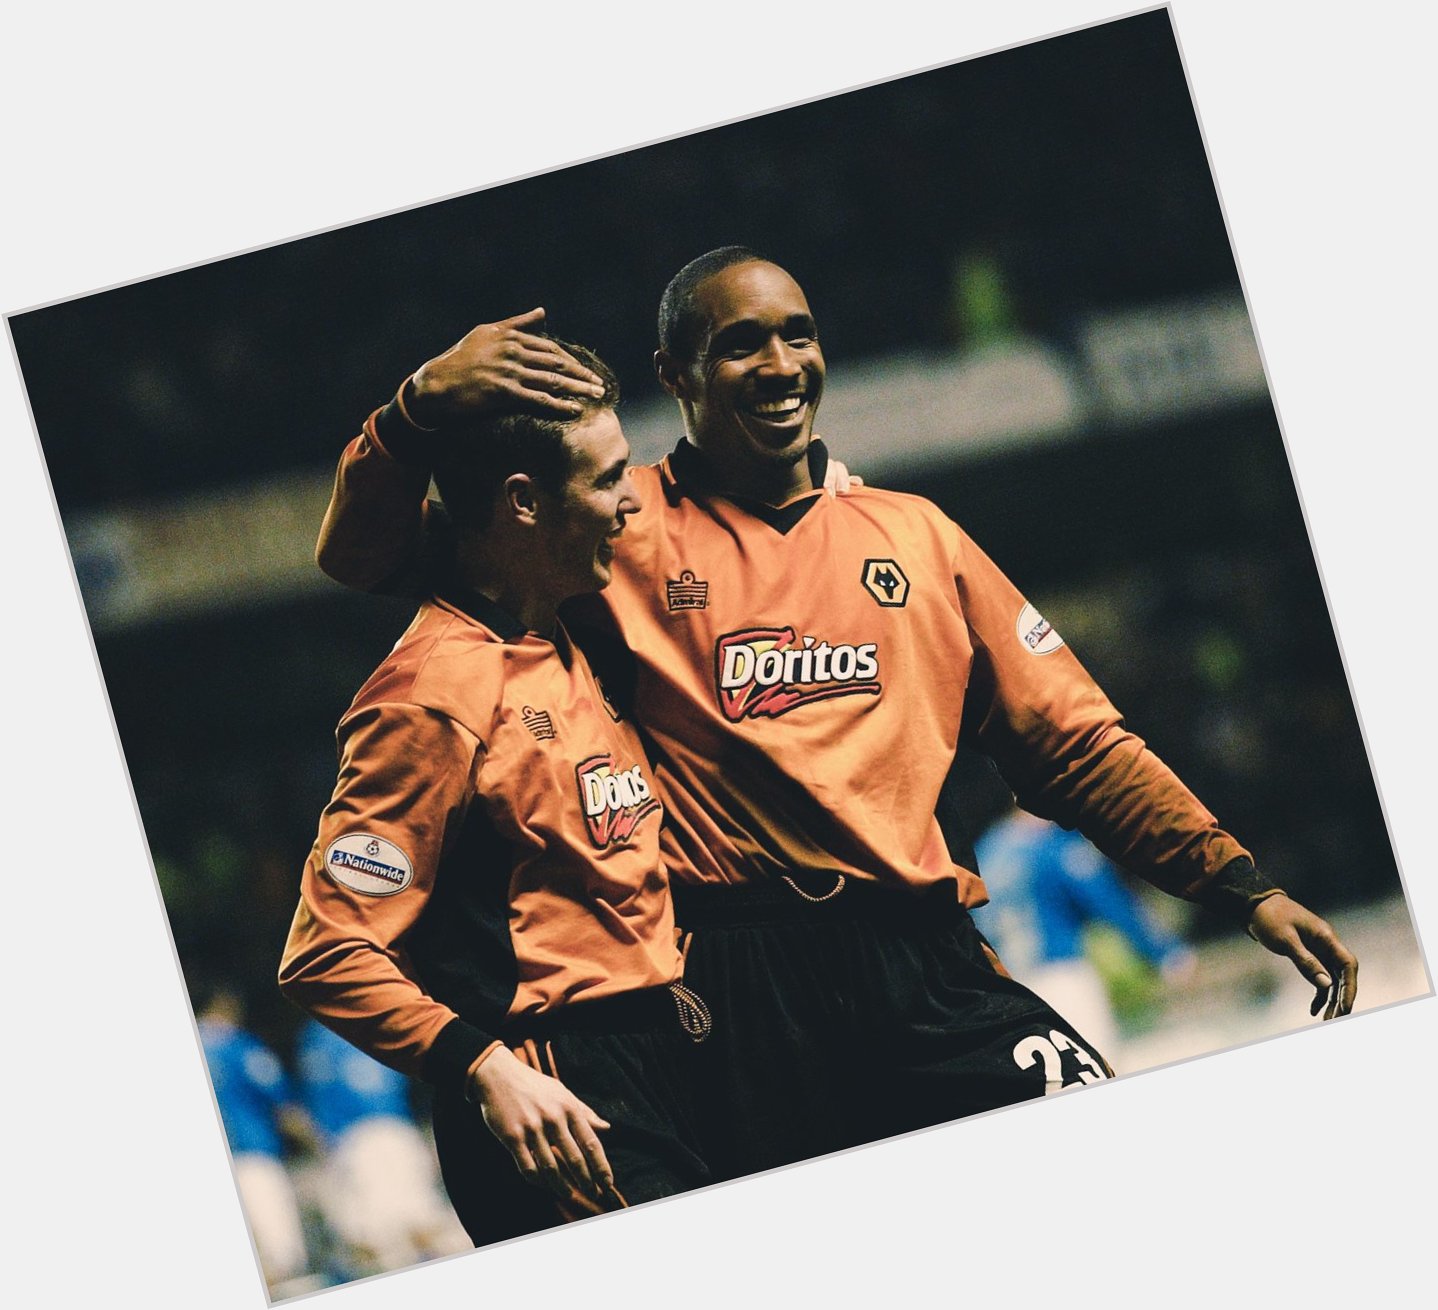  Wishing our former player Paul Ince a very happy birthday!  